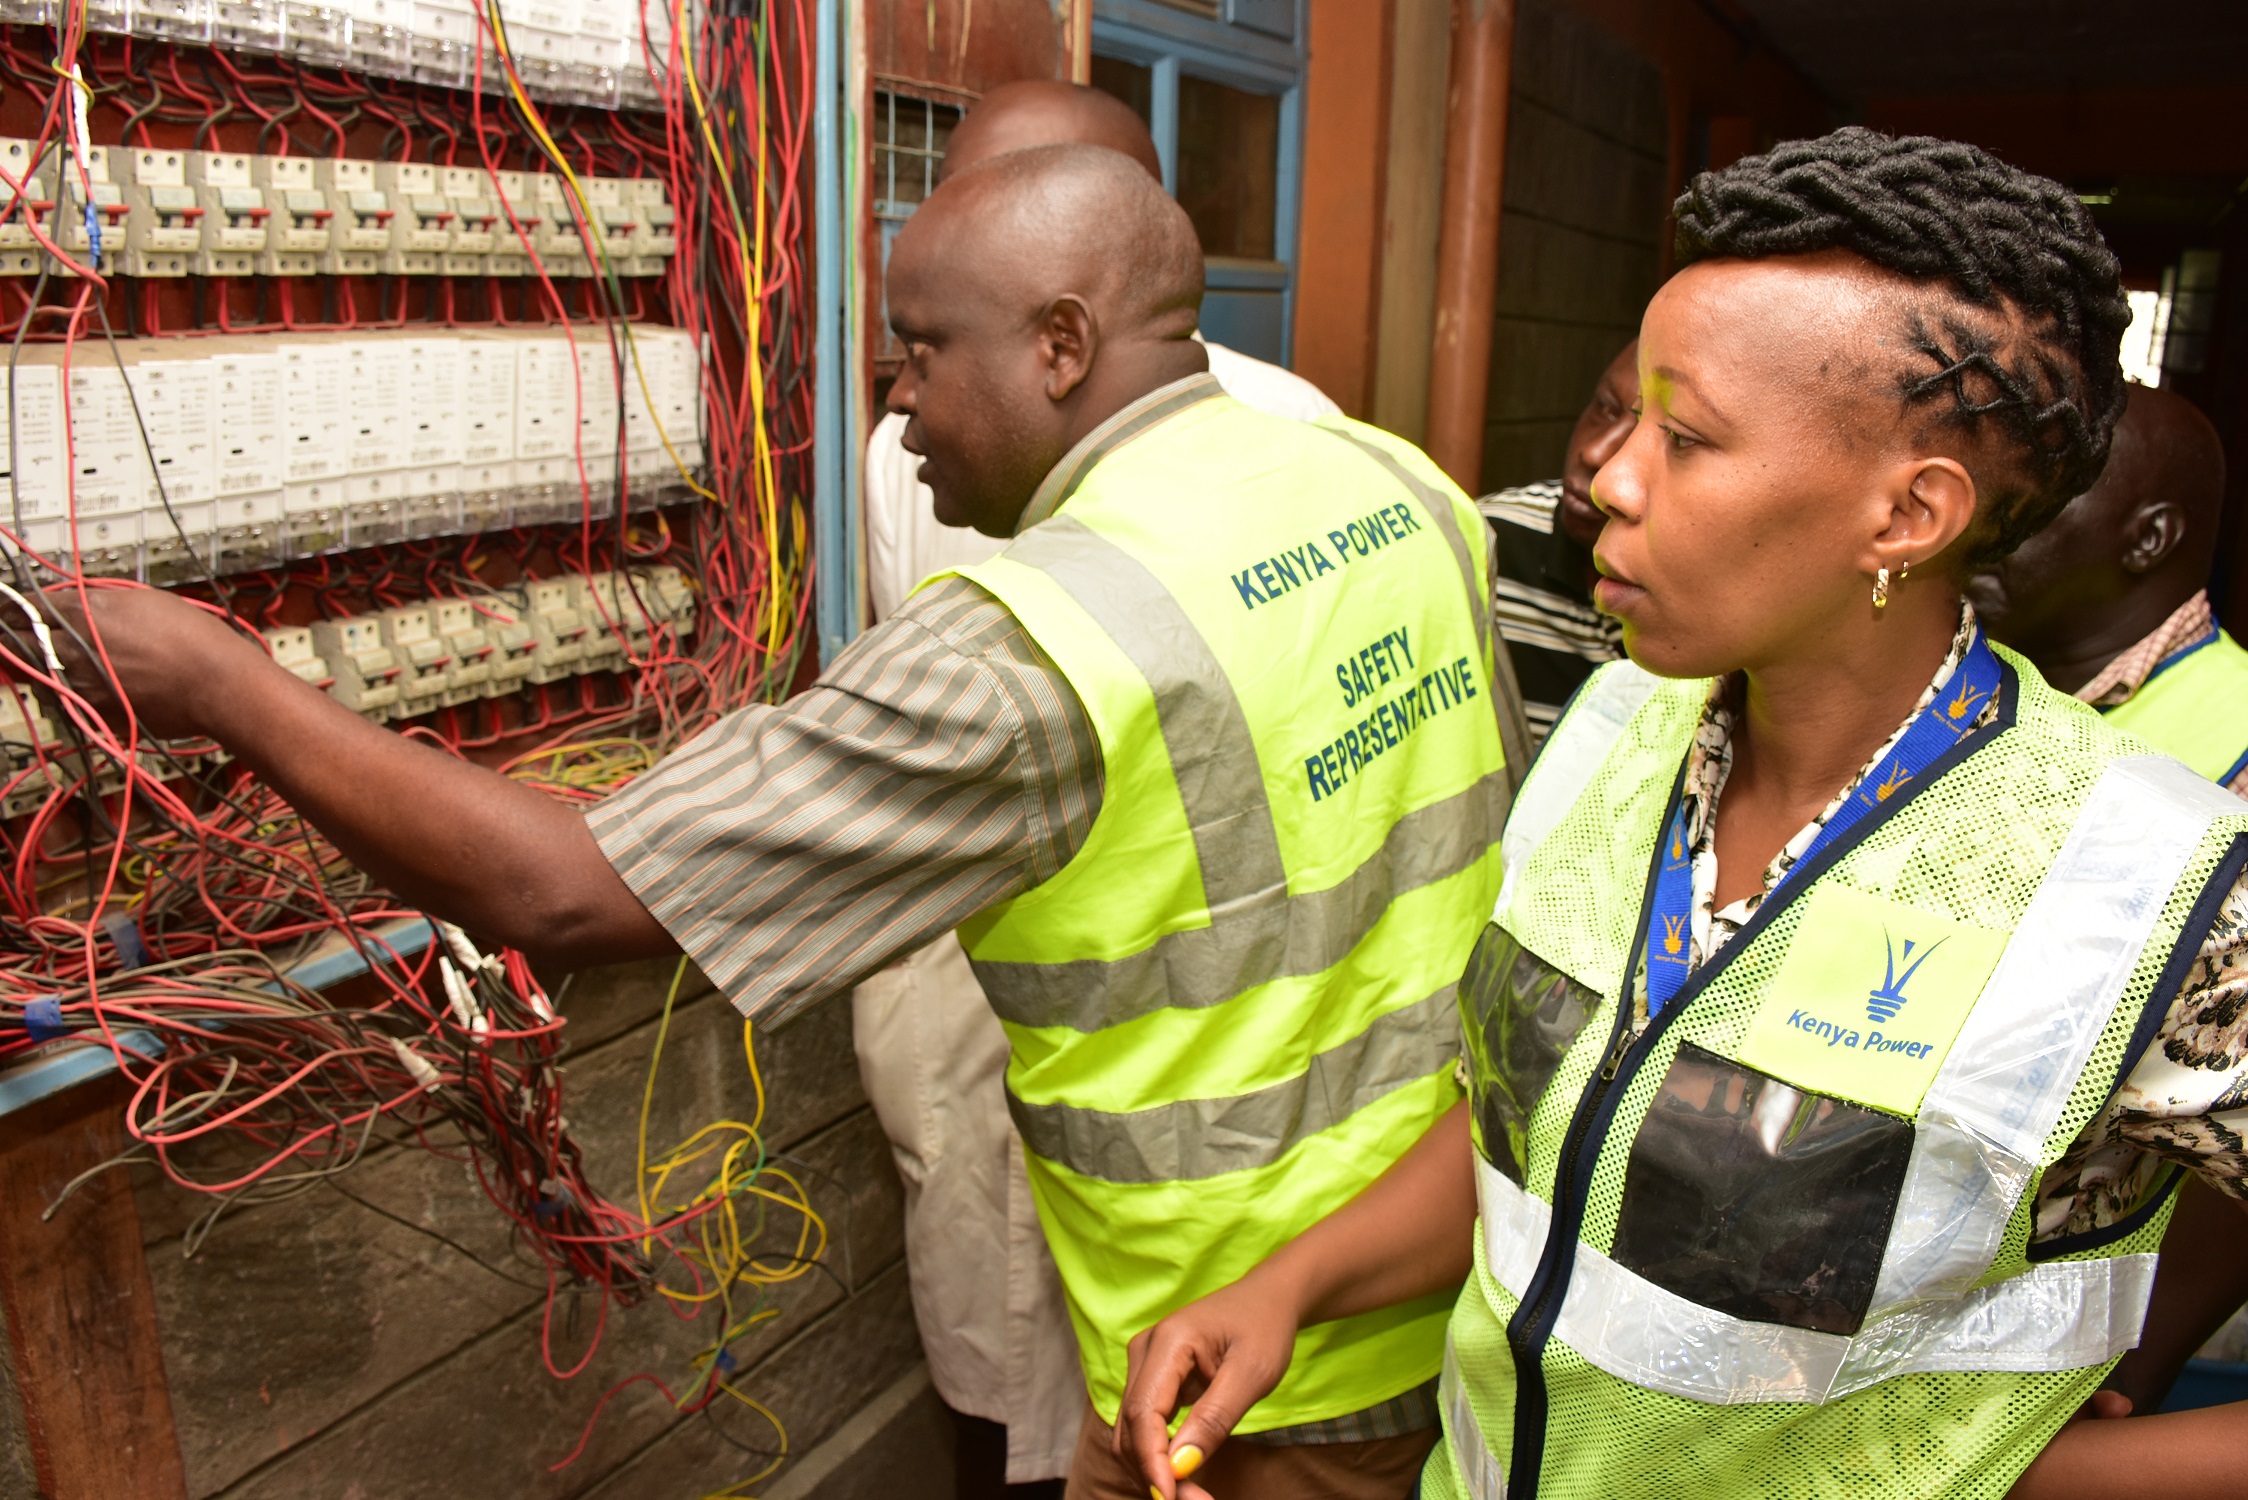 Kenya Power Revenue Protection Unit officer Jervase Ndaru and Security Officer Stella Mutuku disconnecting illegal power connections at Tassia in Nairobi 1